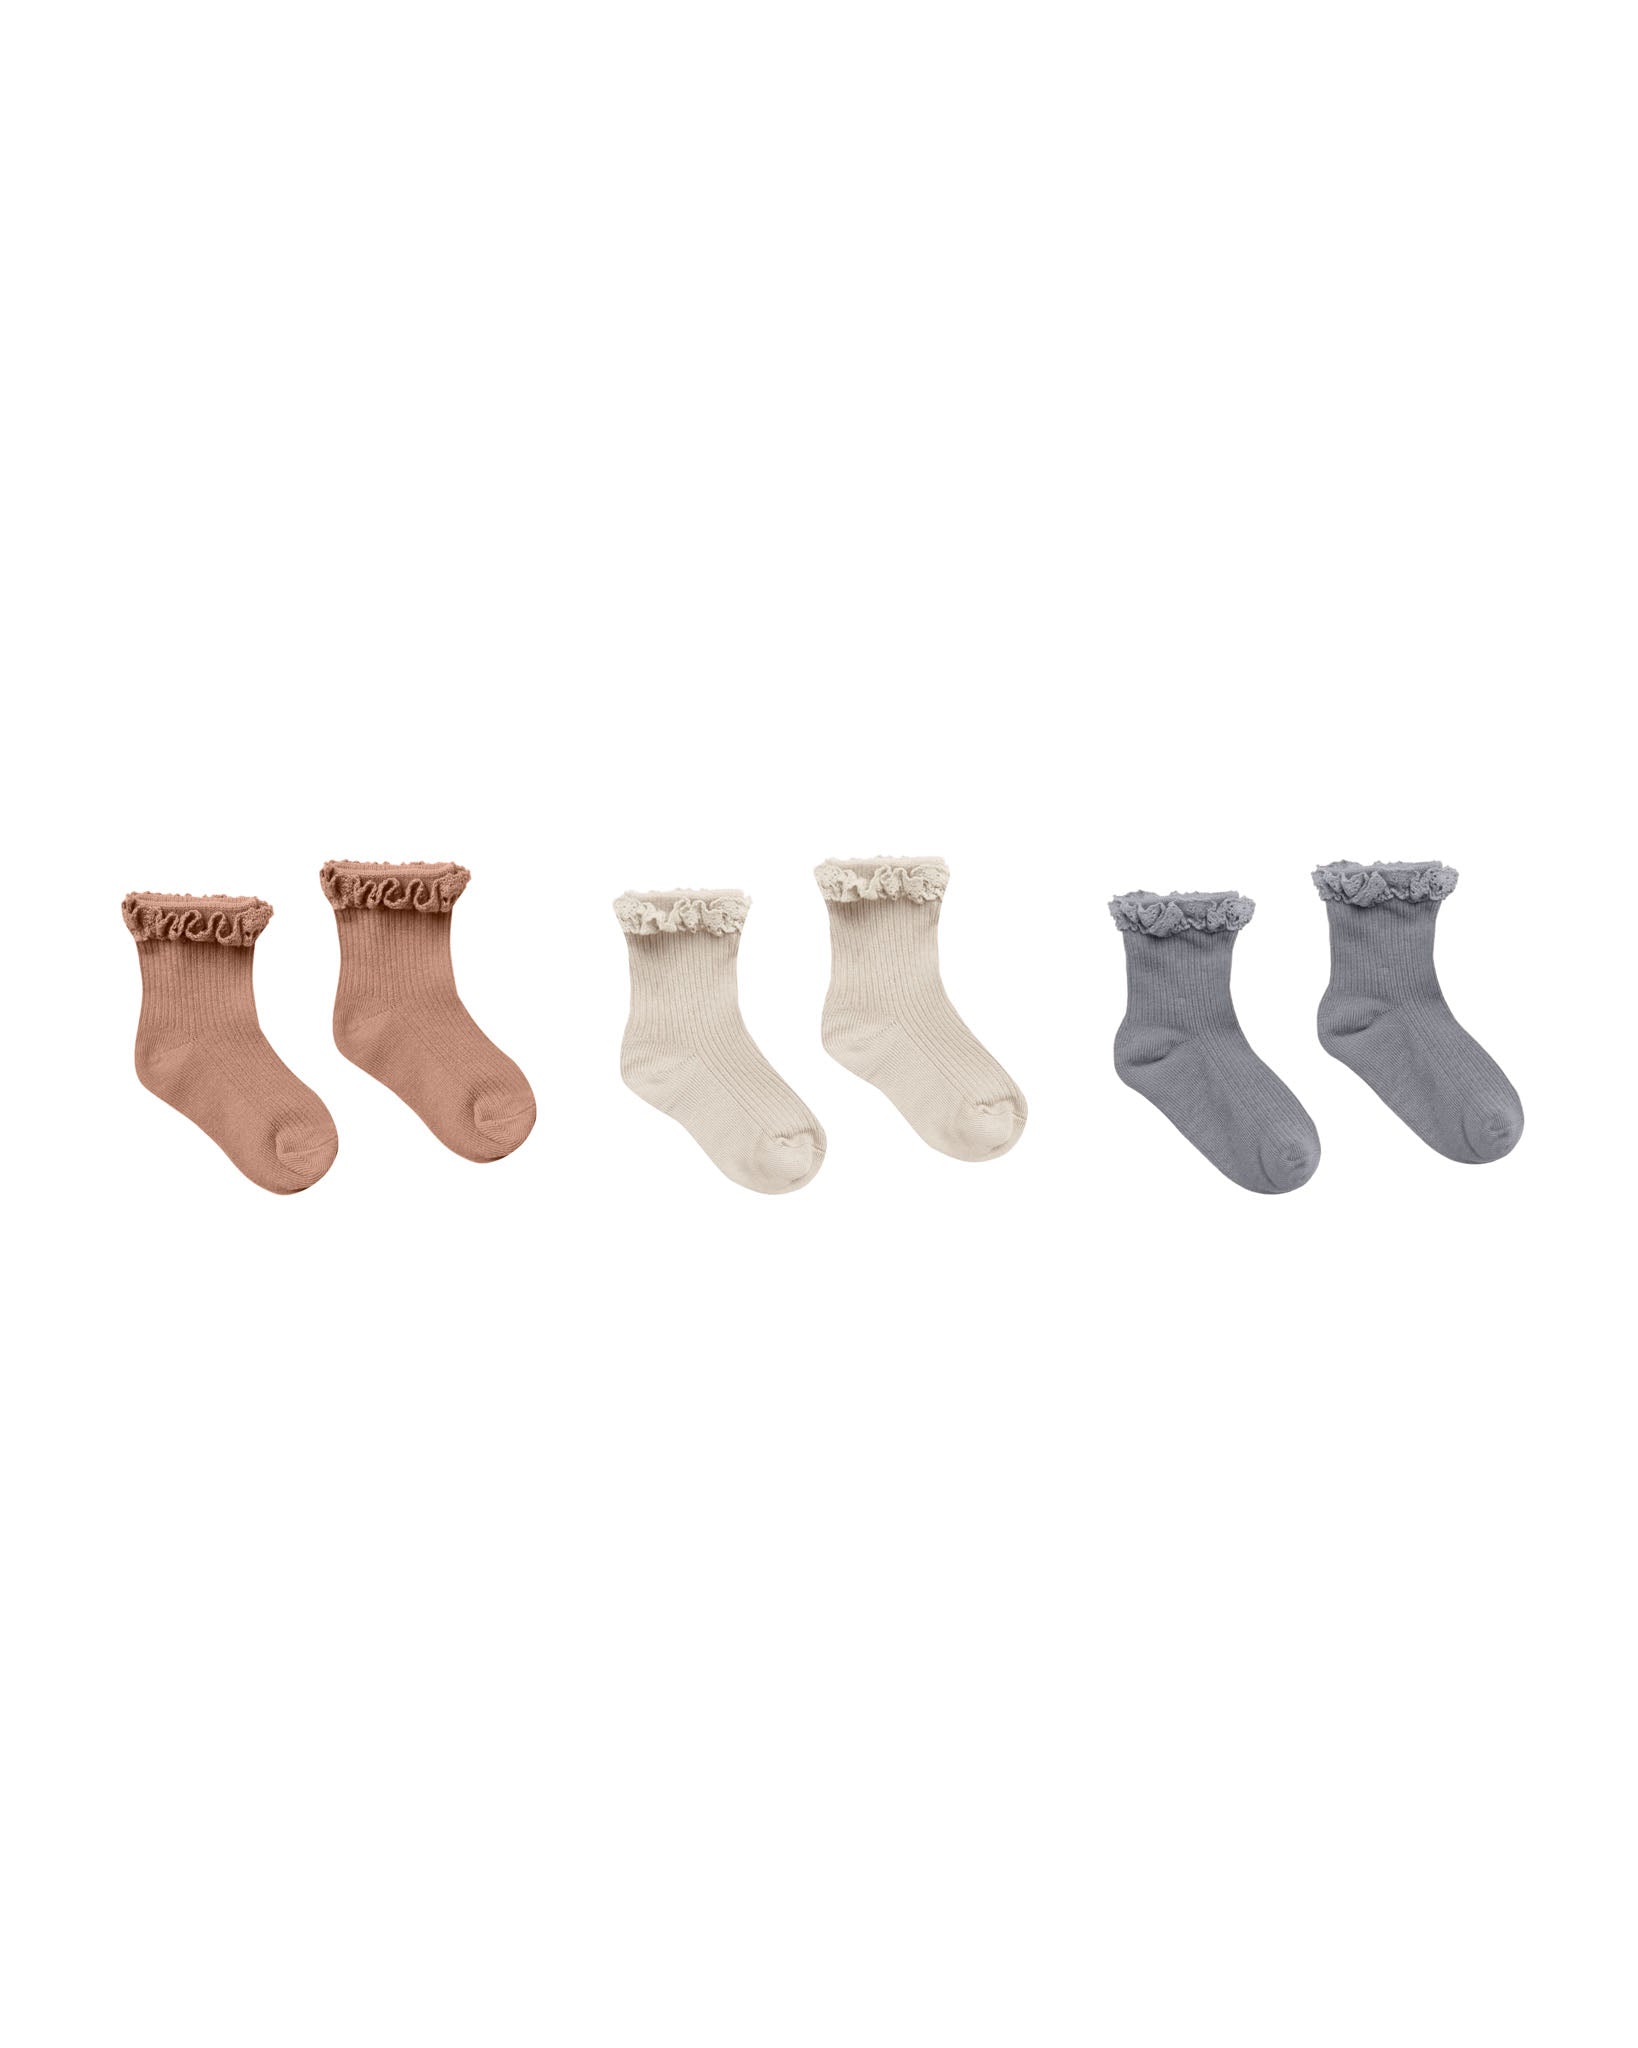 Lace Trim Socks, 3 Pack | Spice, Natural, Dusty Blue